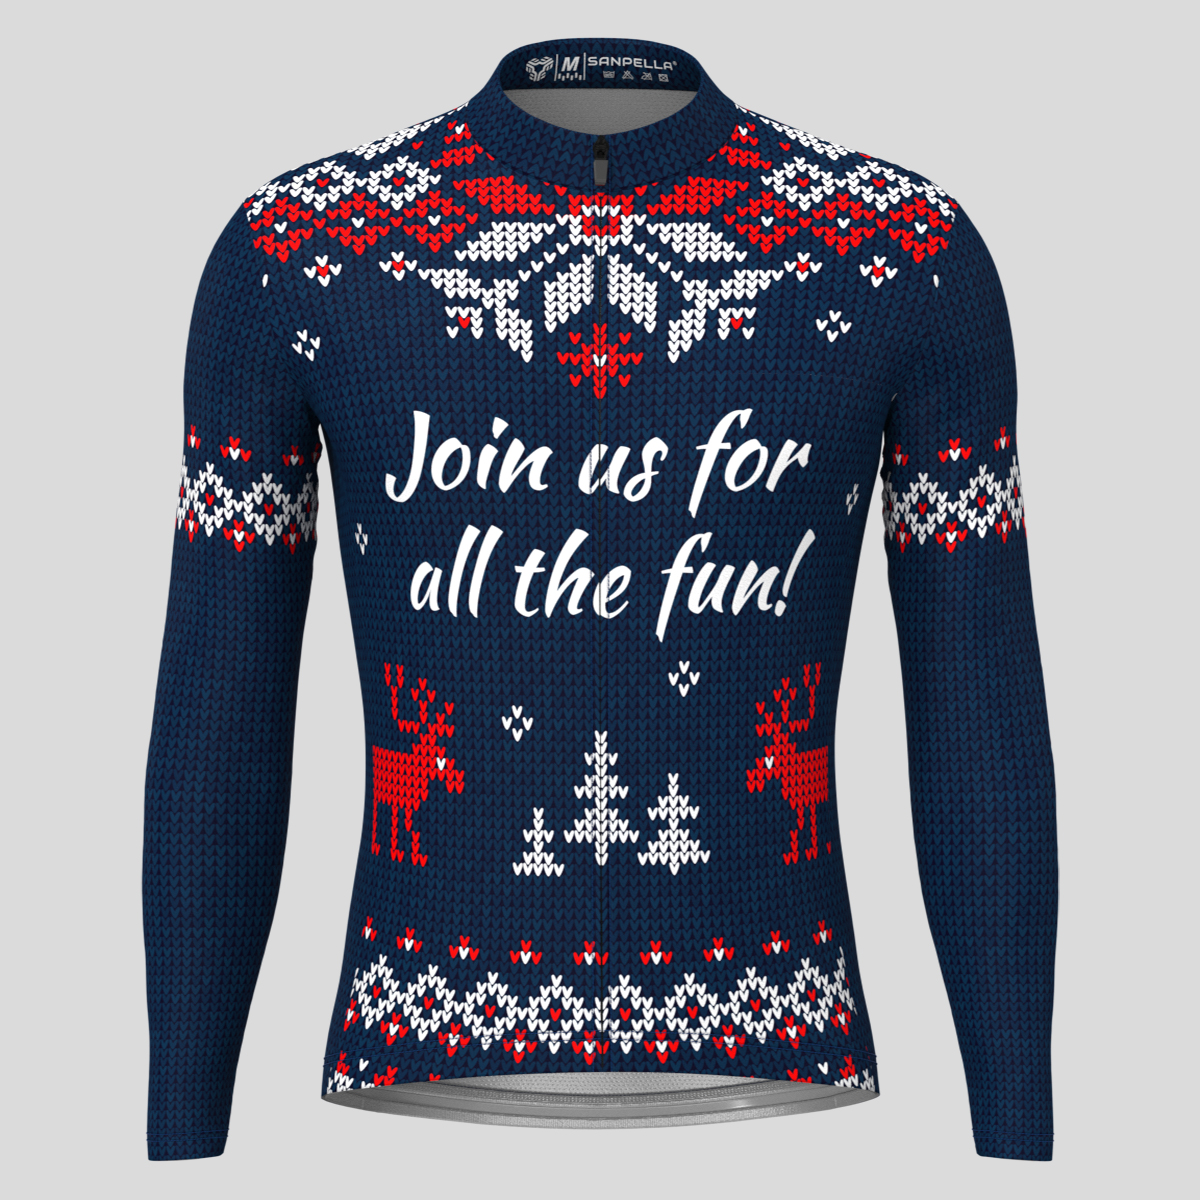 XMAS Ugly Sweater Themed Men's LS Cycling Jersey - Blue